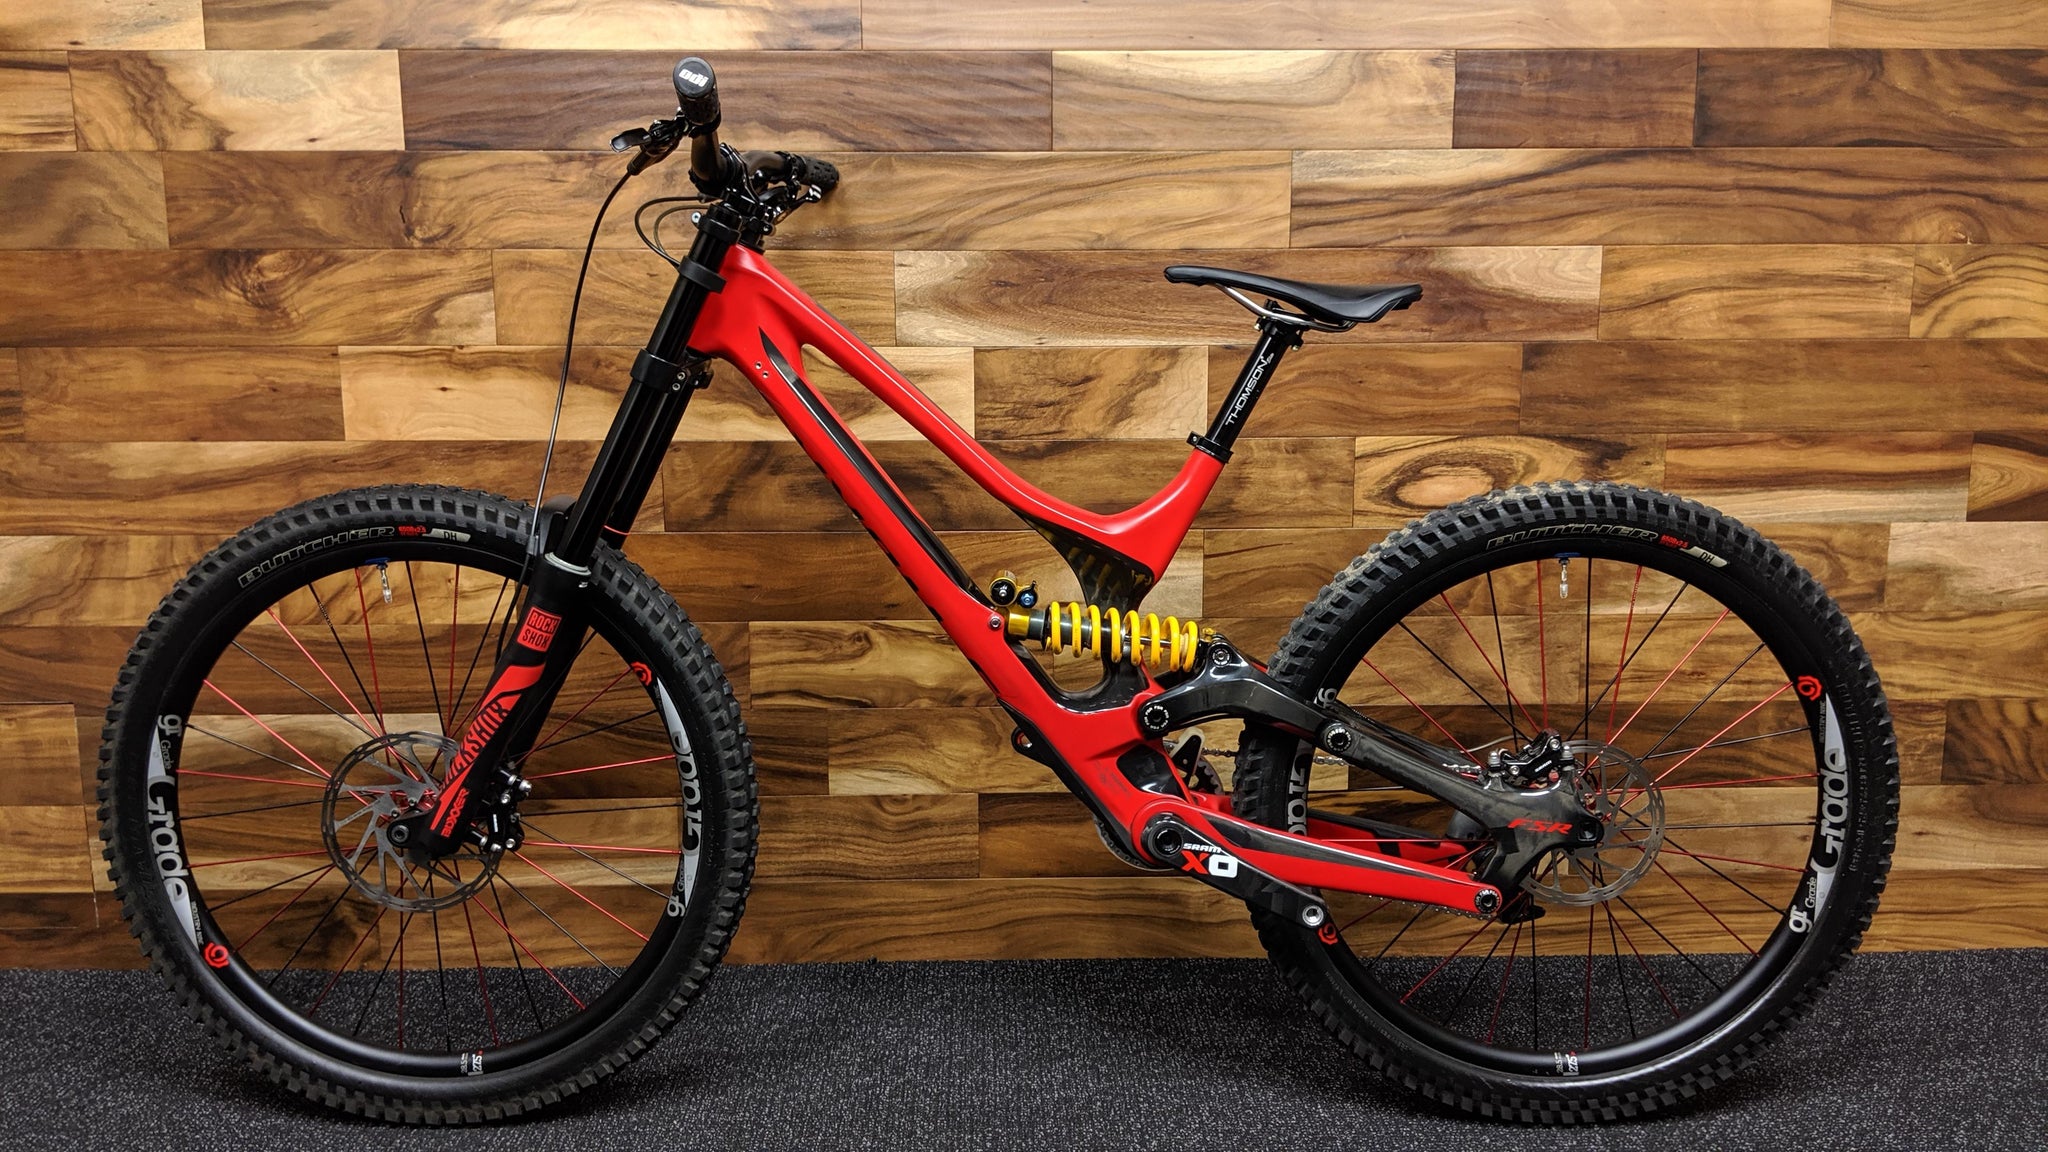 2016 S-WORKS DEMO 8 CARBON 27.5"